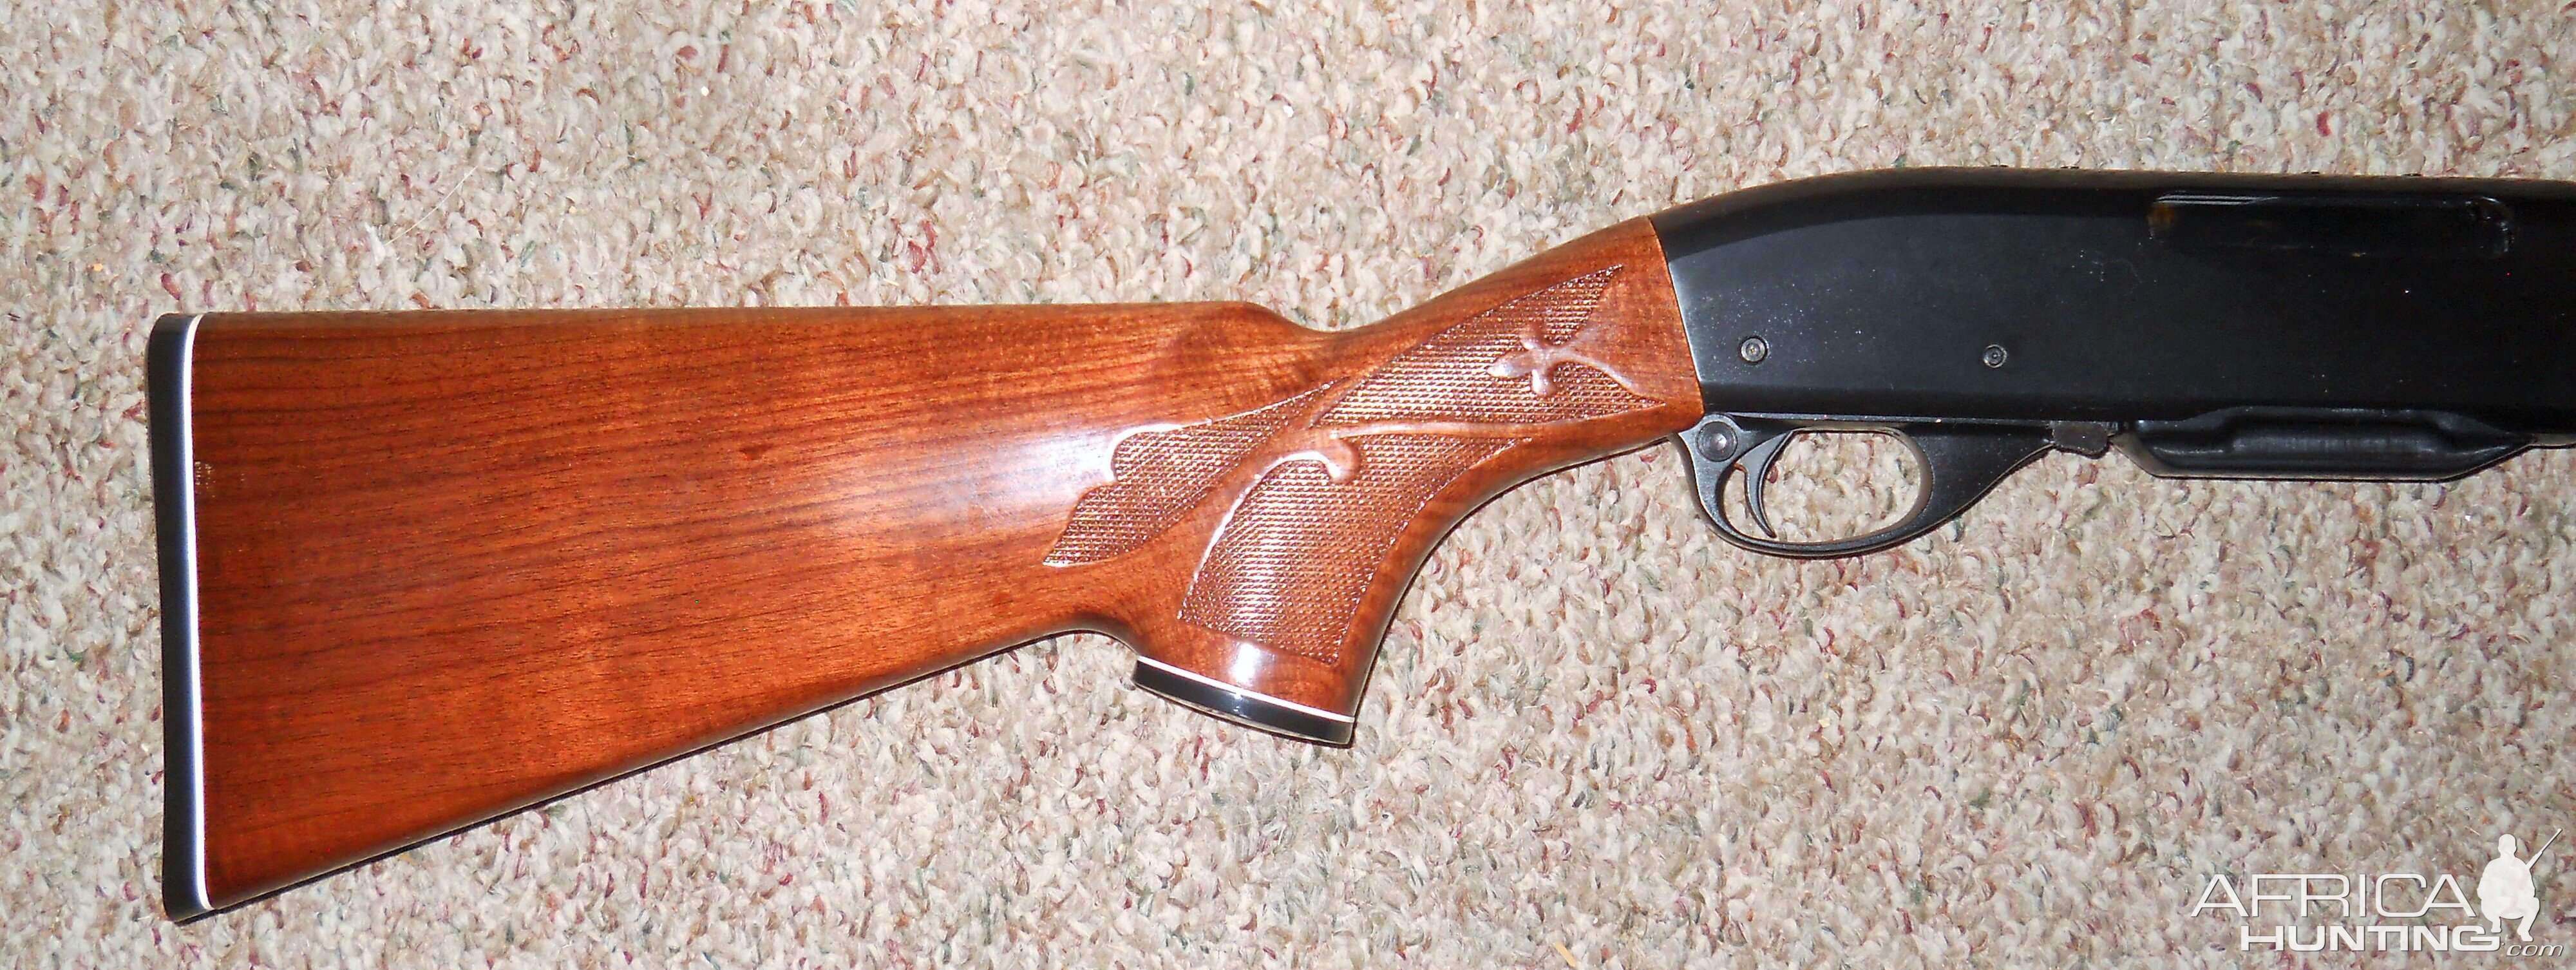 Remington 7600,s Whelens Rifle with 22" barrels